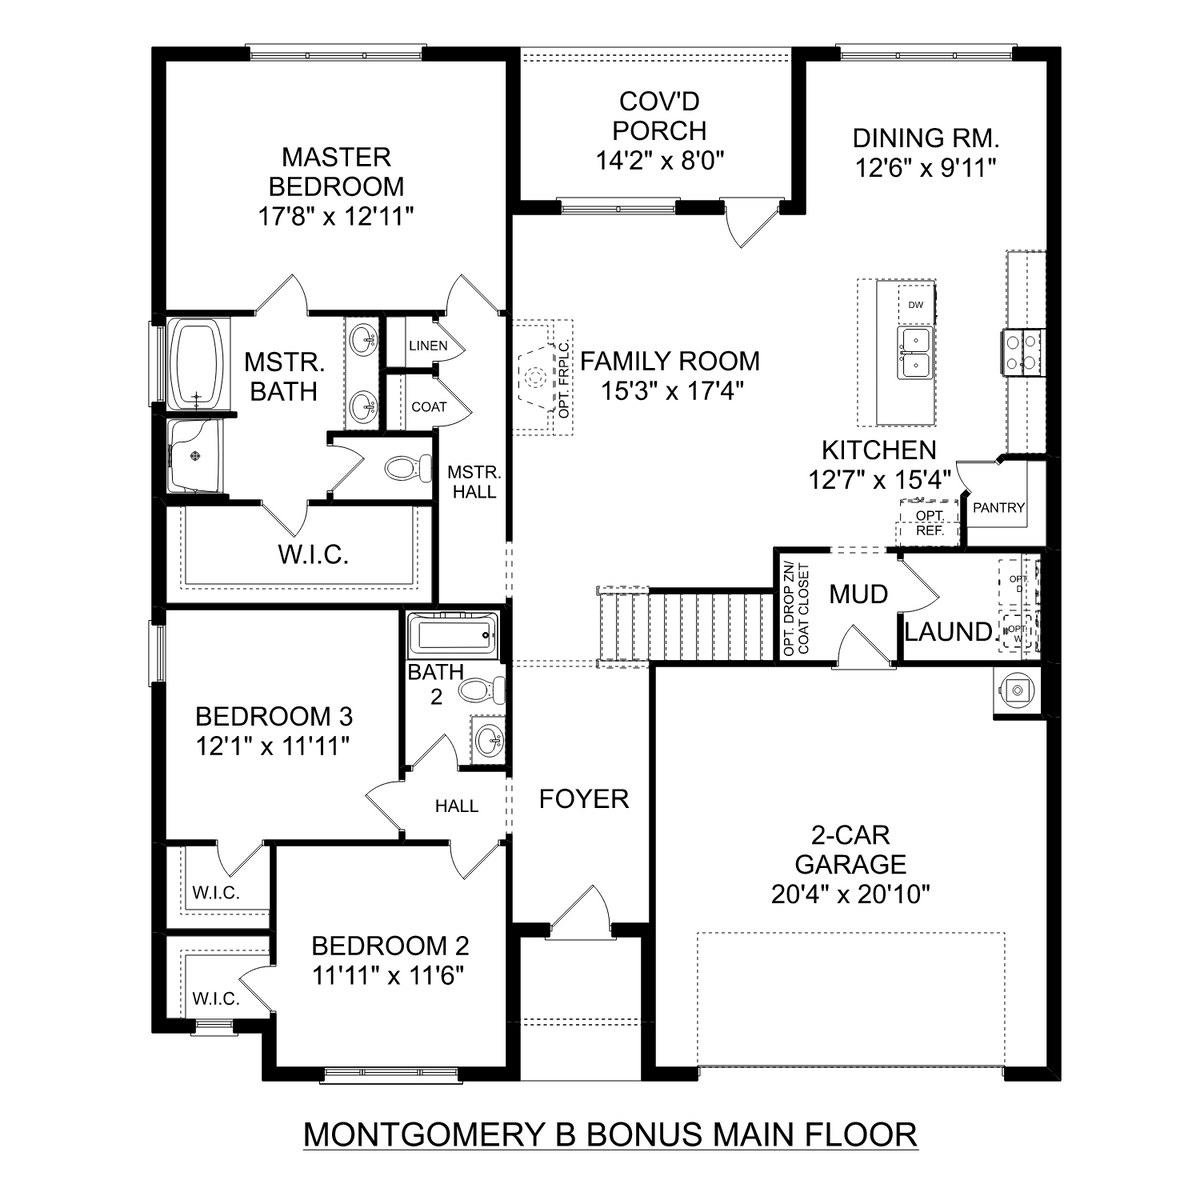 1 - The Montgomery B With Bonus buildable floor plan layout in Davidson Homes' Creekside community.